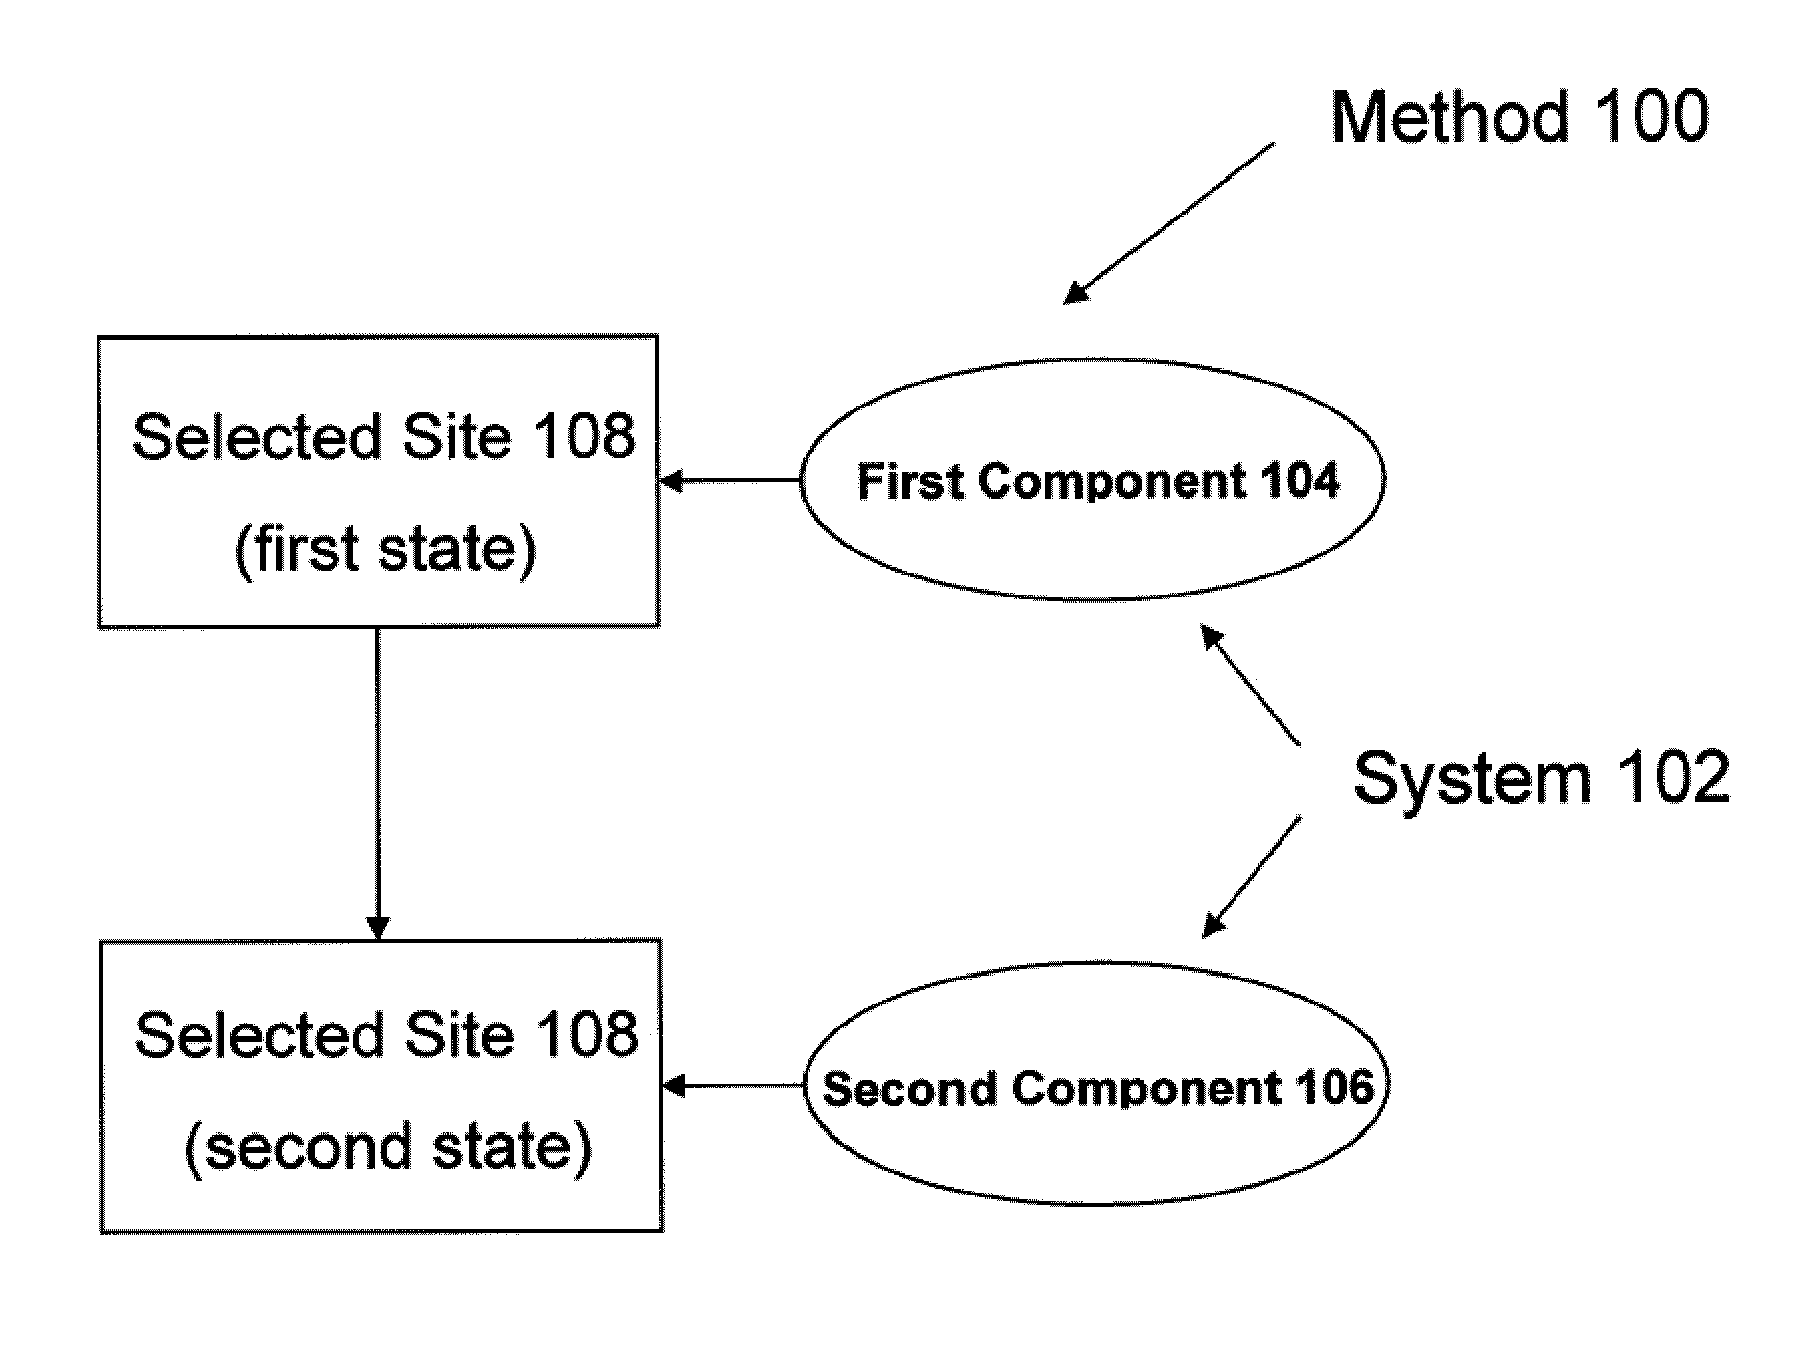 Methods and systems for treatment and/or diagnosis